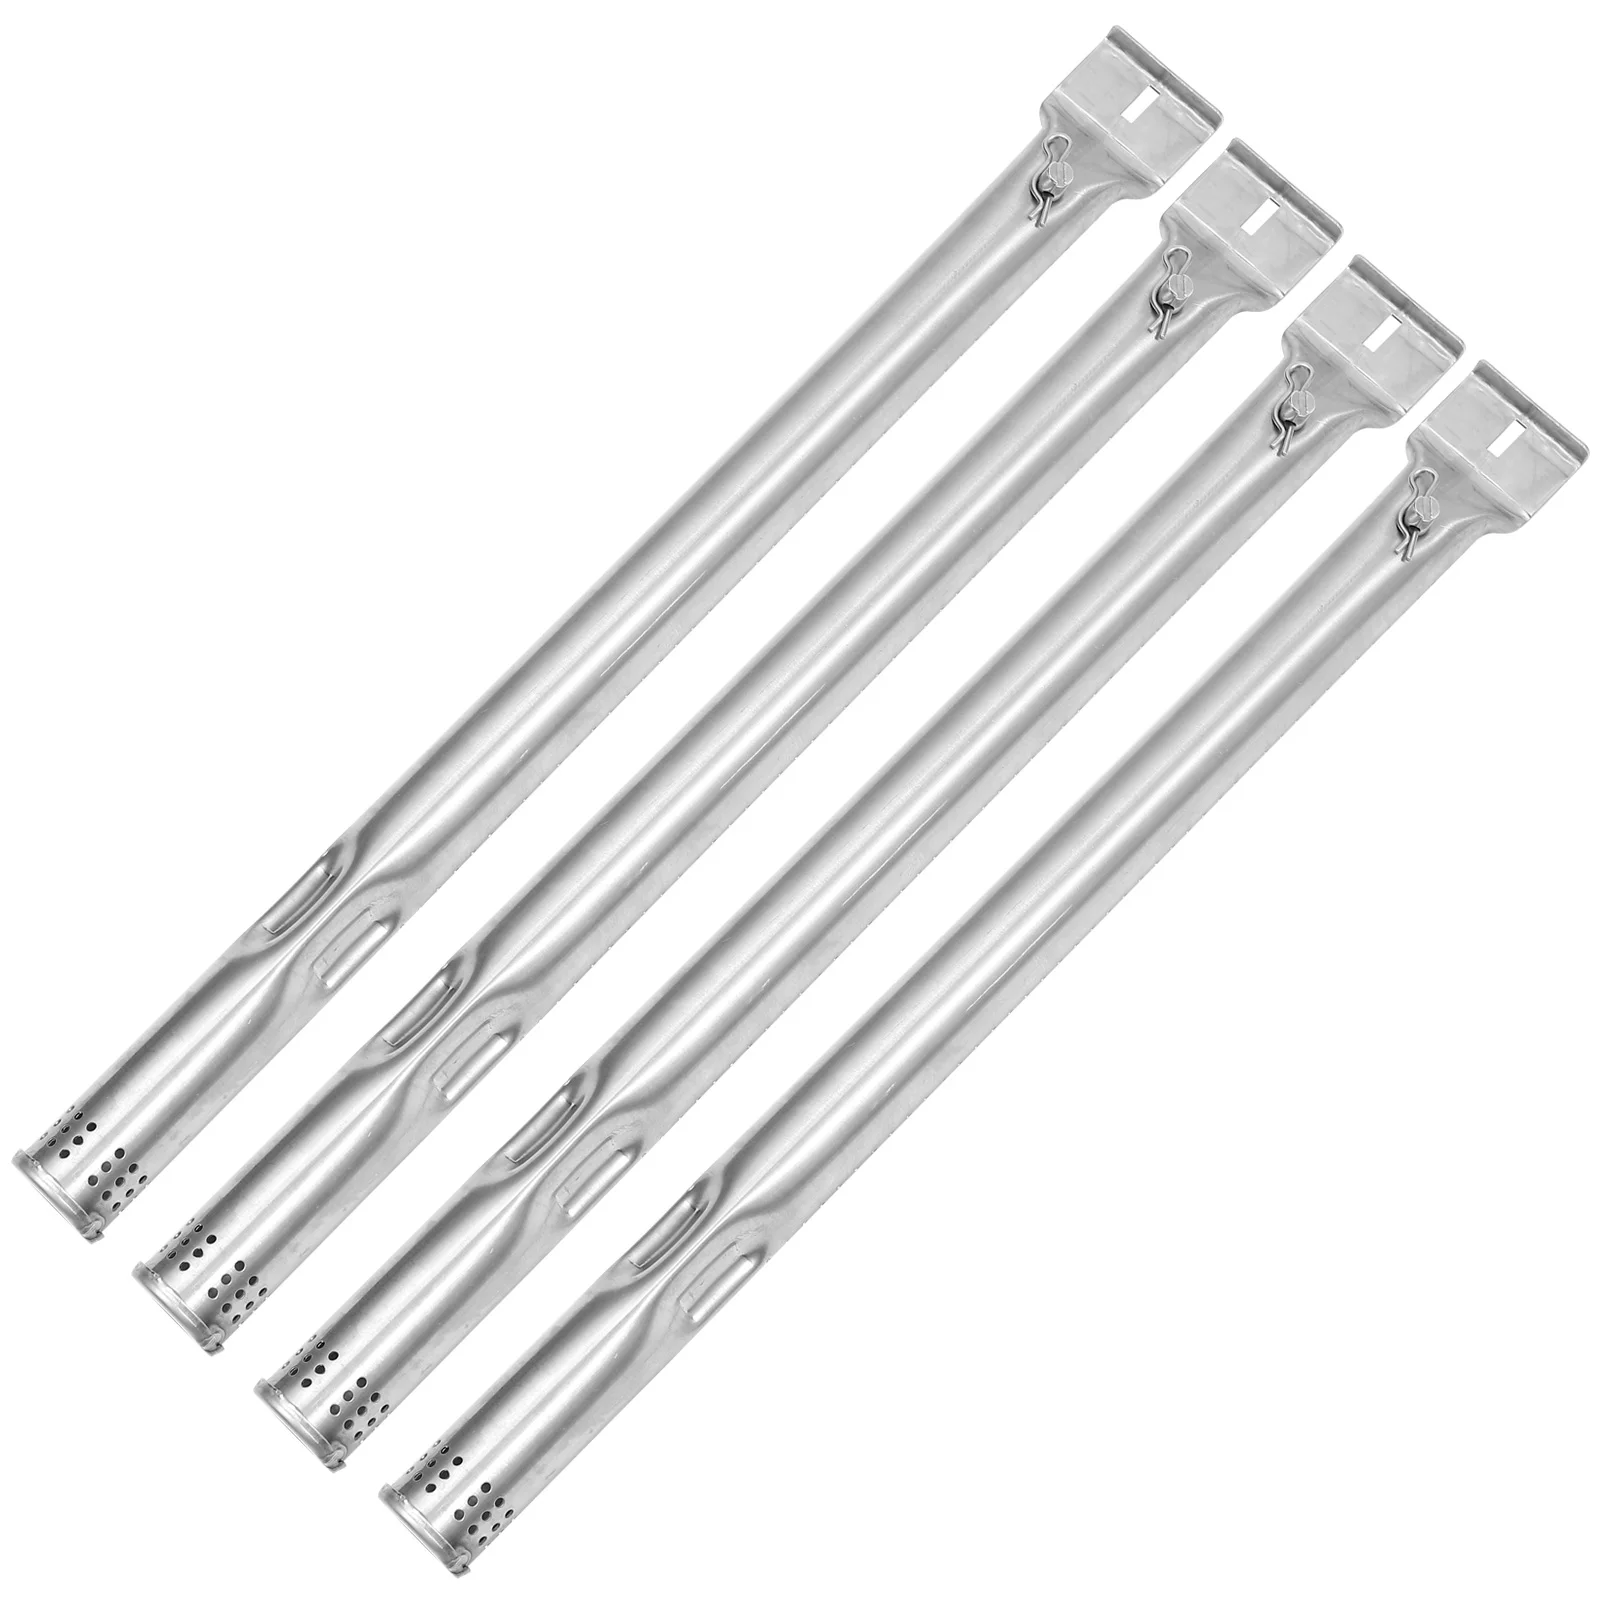 

4 Pcs Member Home Burner Tubes BBQ Supplies Gas Grill Outdoor Accessories Oven Griddle Replacement Parts